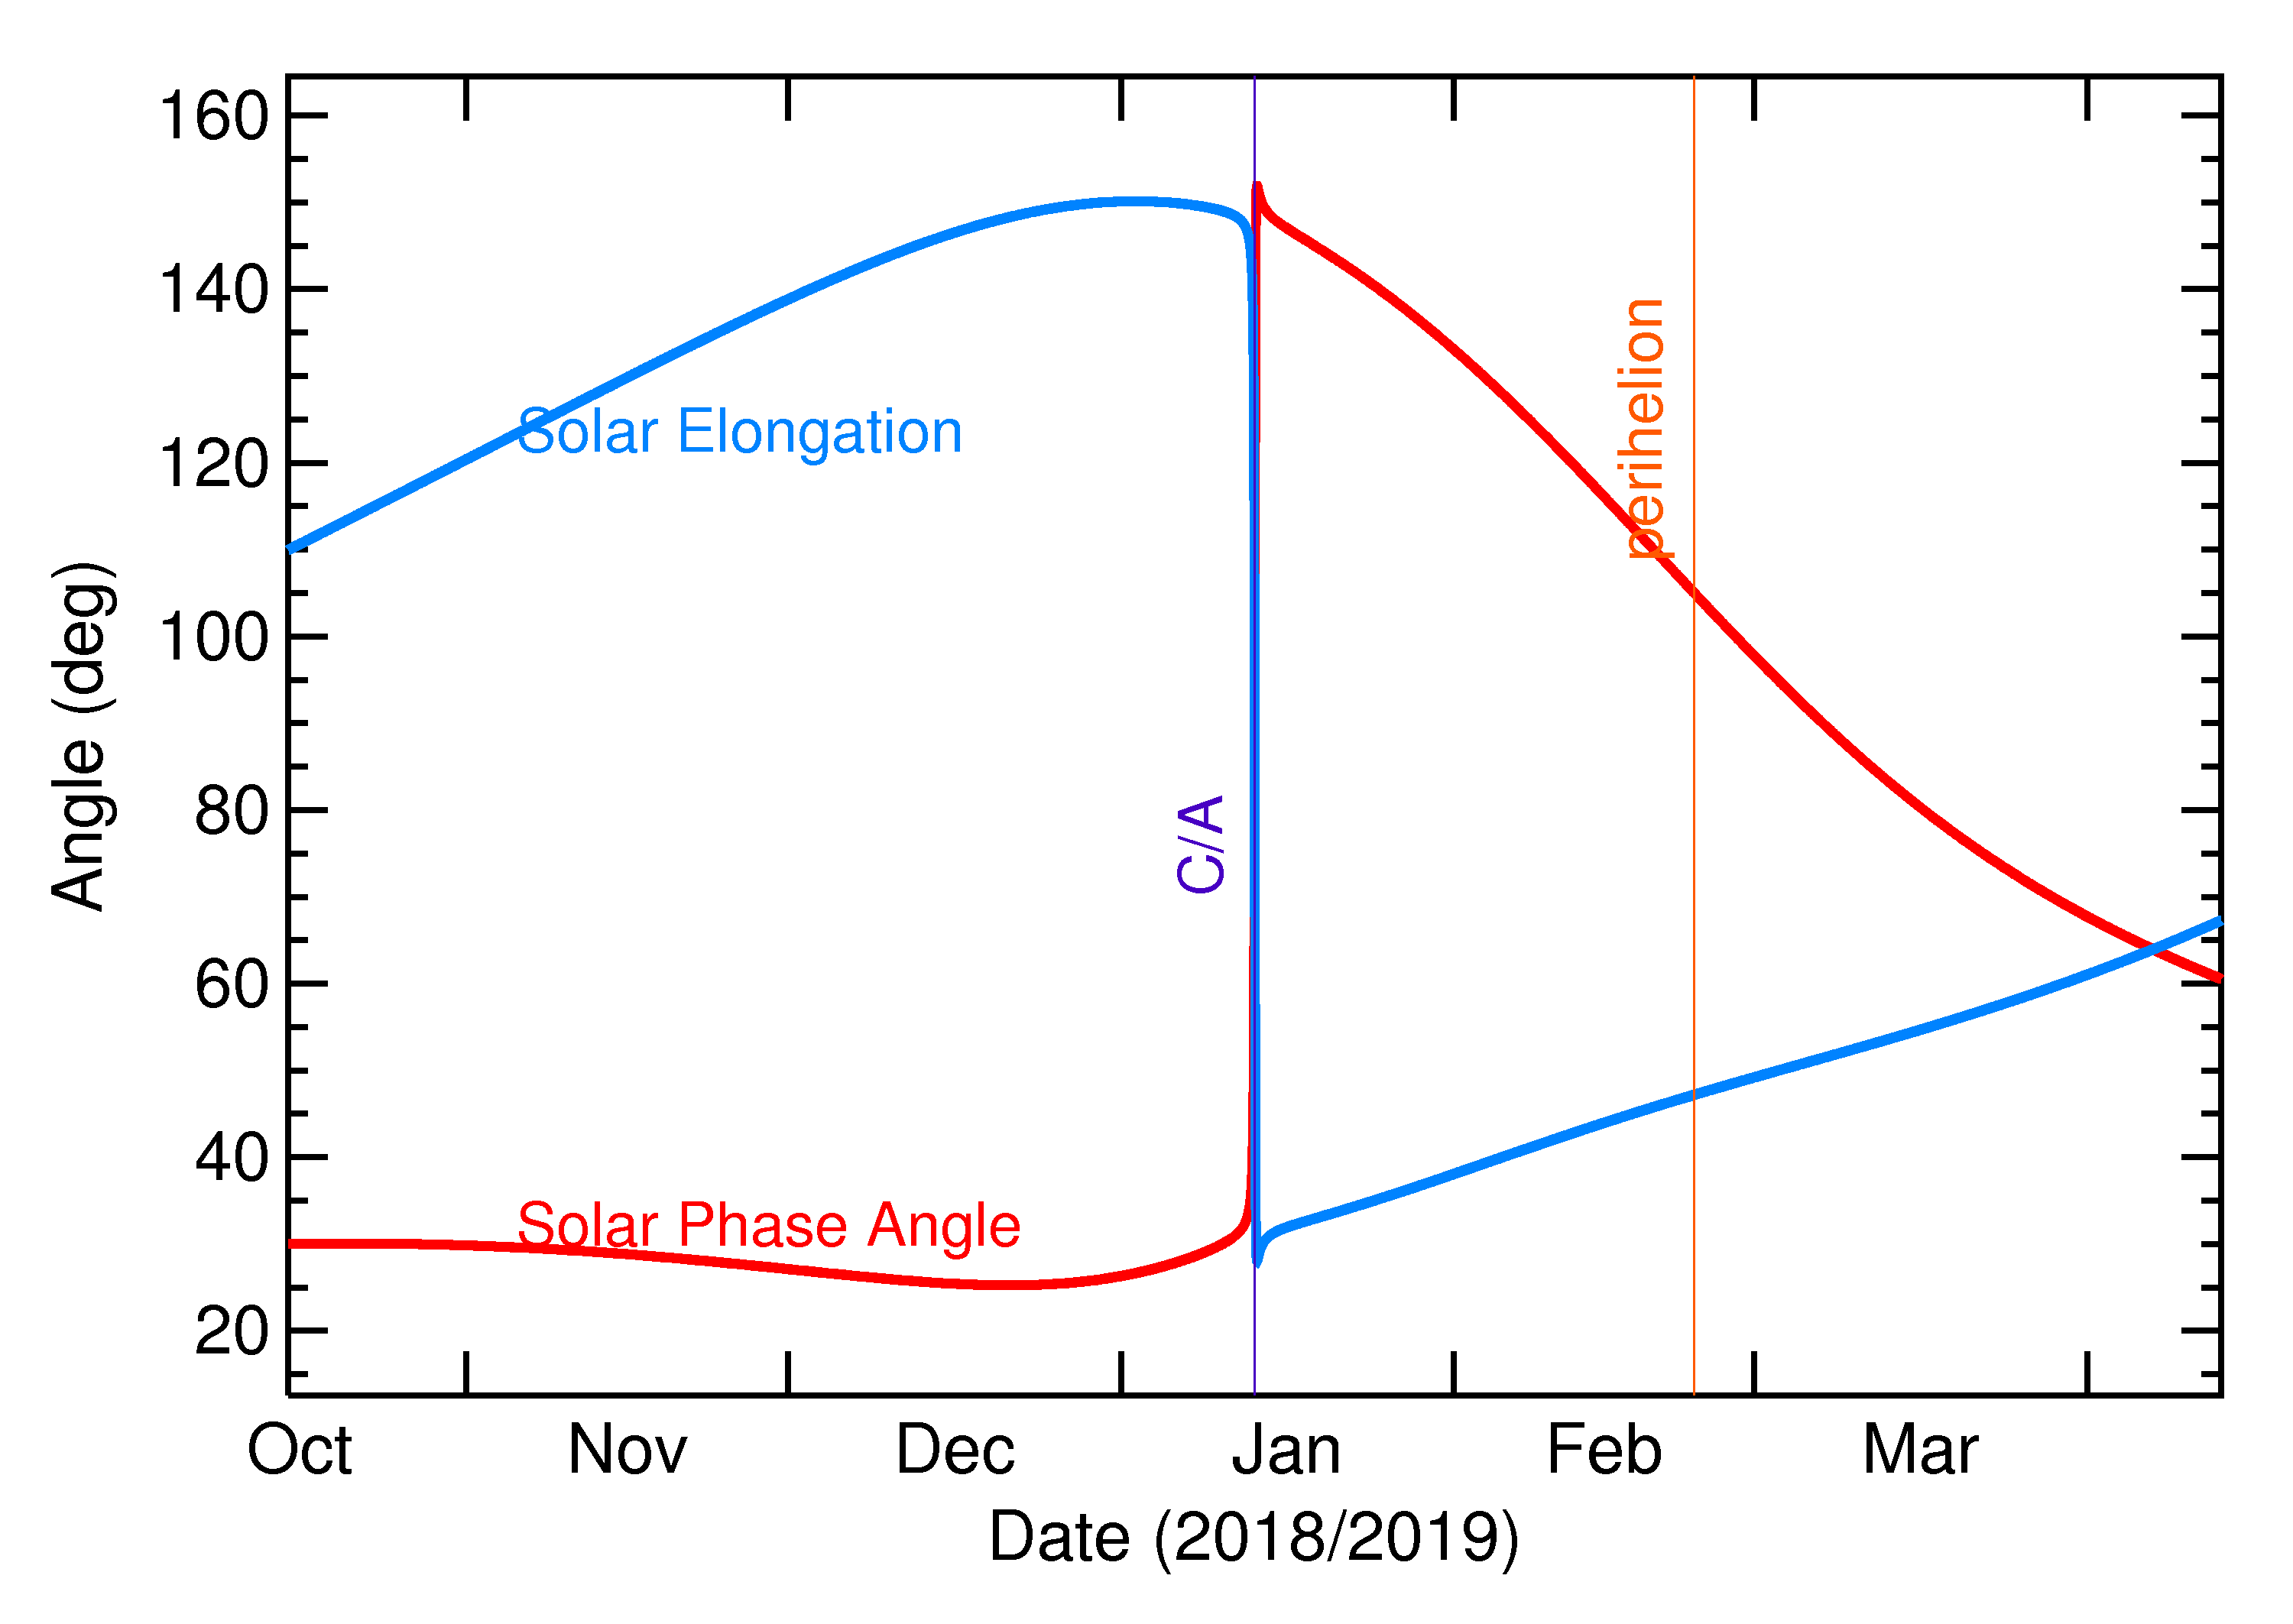 Solar Elongation and Solar Phase Angle of 2019 AE9 in the months around closest approach